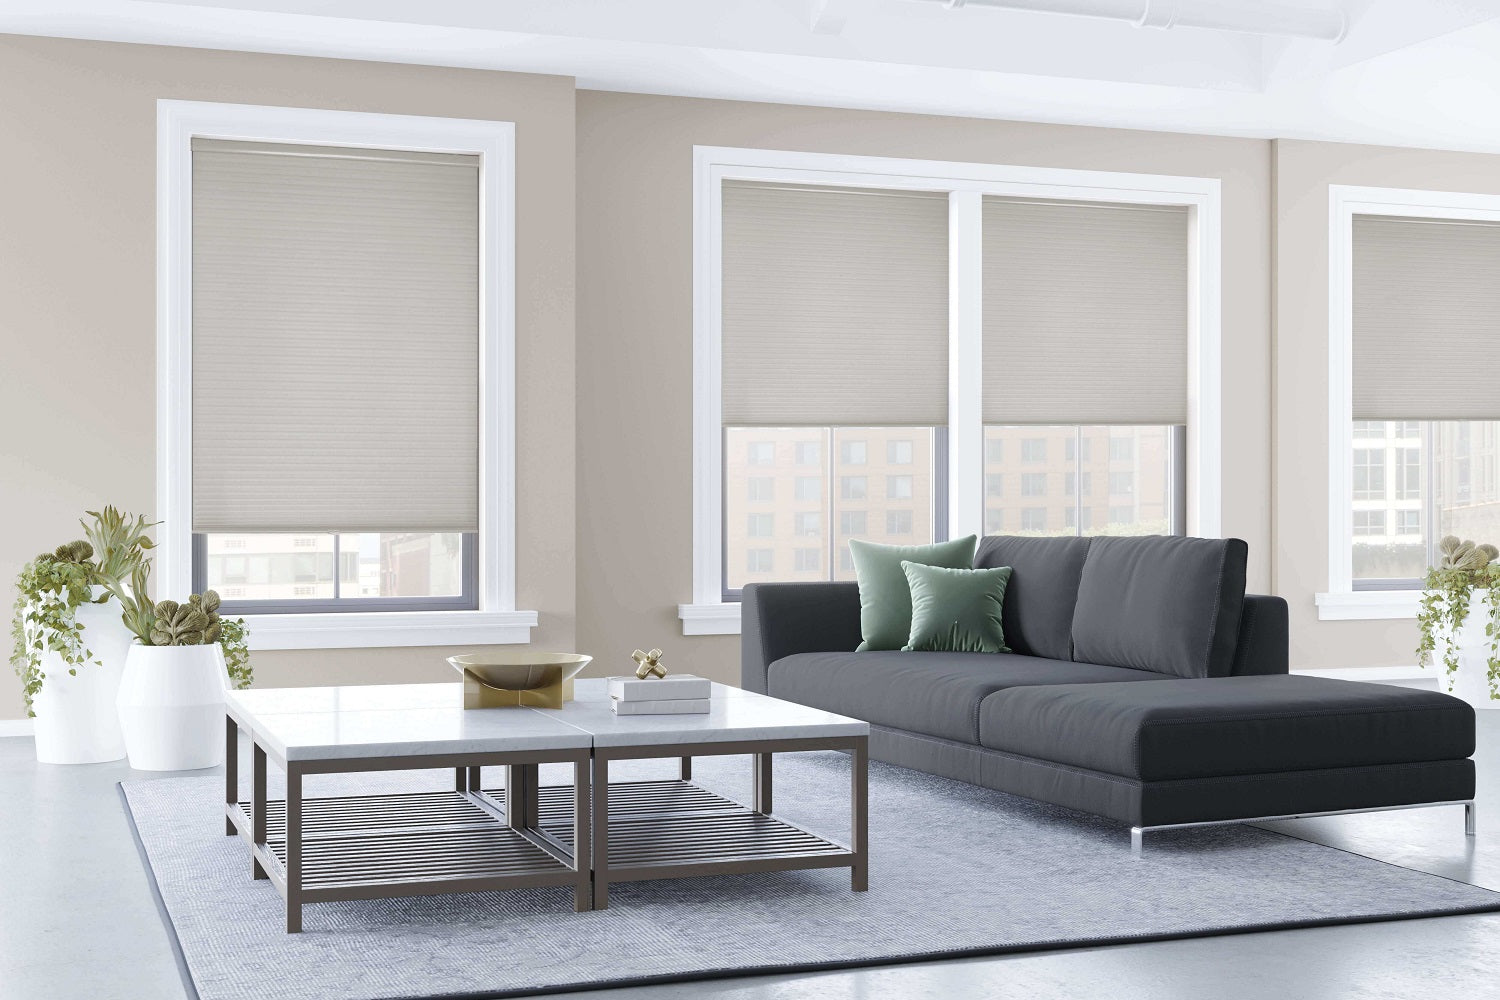 Window Blinds: Custom Window Treatments Made for Your Windows – Factory  Direct Blinds